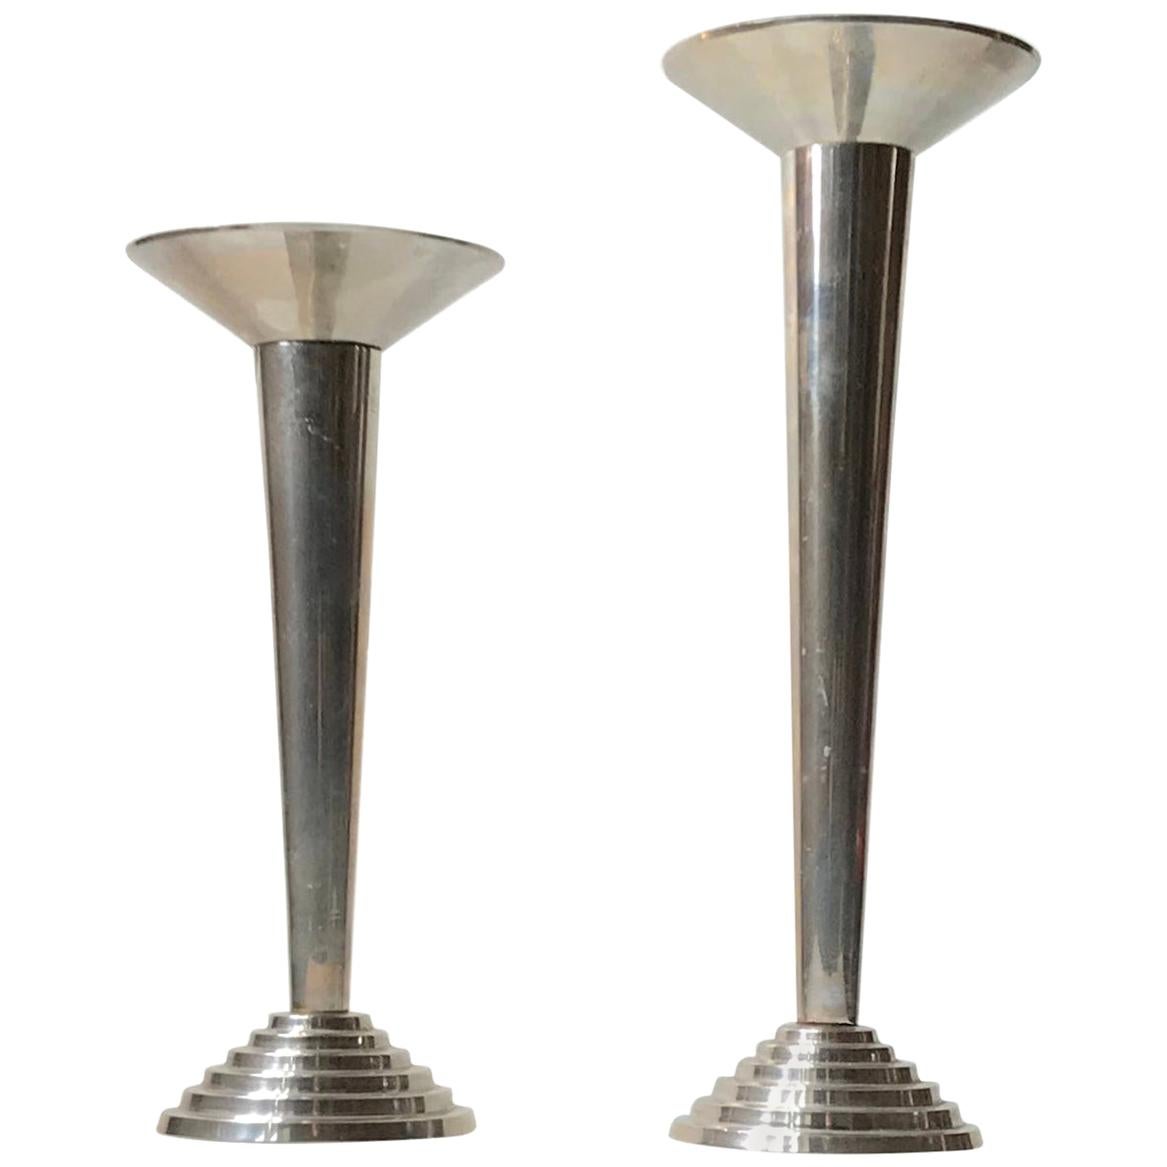 Art Deco Candlesticks in Steel, Germany, 1930s For Sale